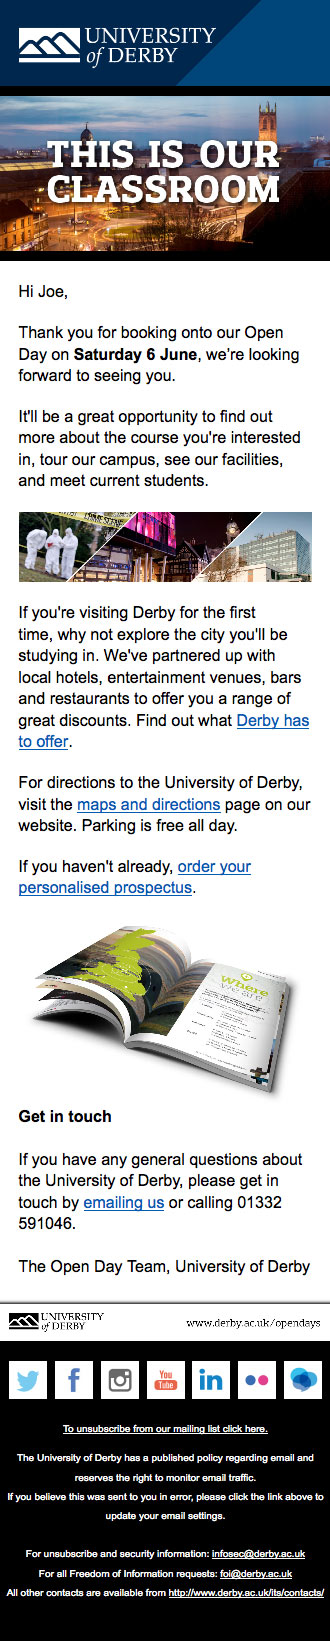 University of Derby email responsive